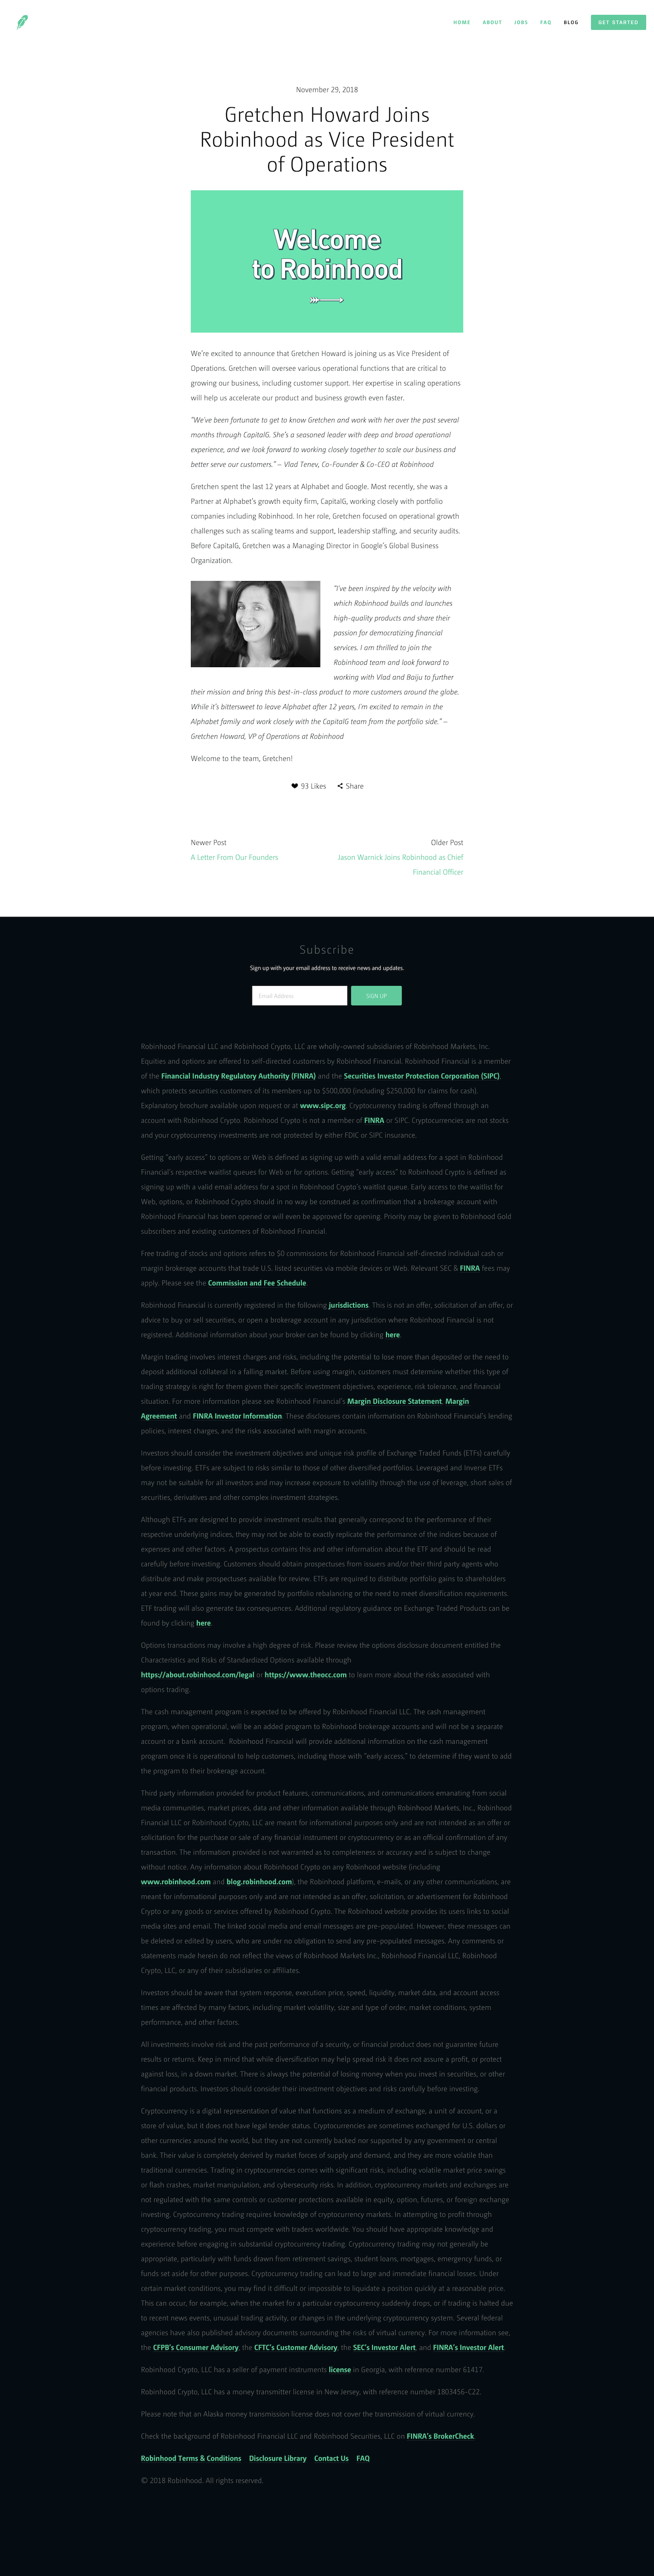 Screenshot of the Blog - Article page from the Robinhood website.